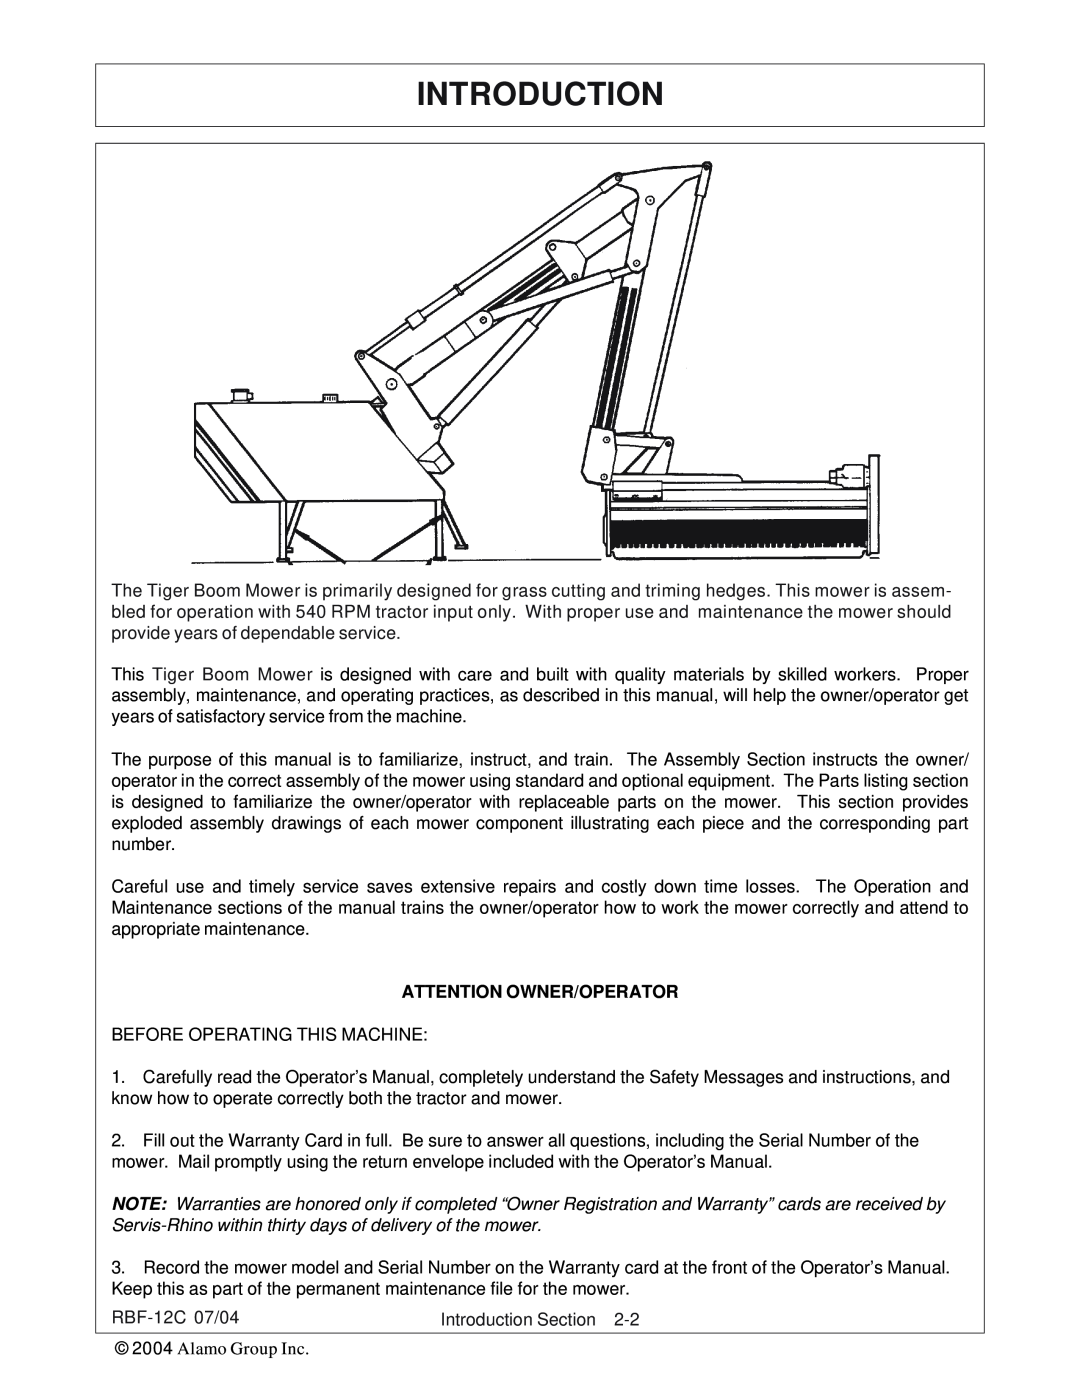 Tiger Products Co., Ltd RBF-12C manual Introduction, Attention Owner/Operator 